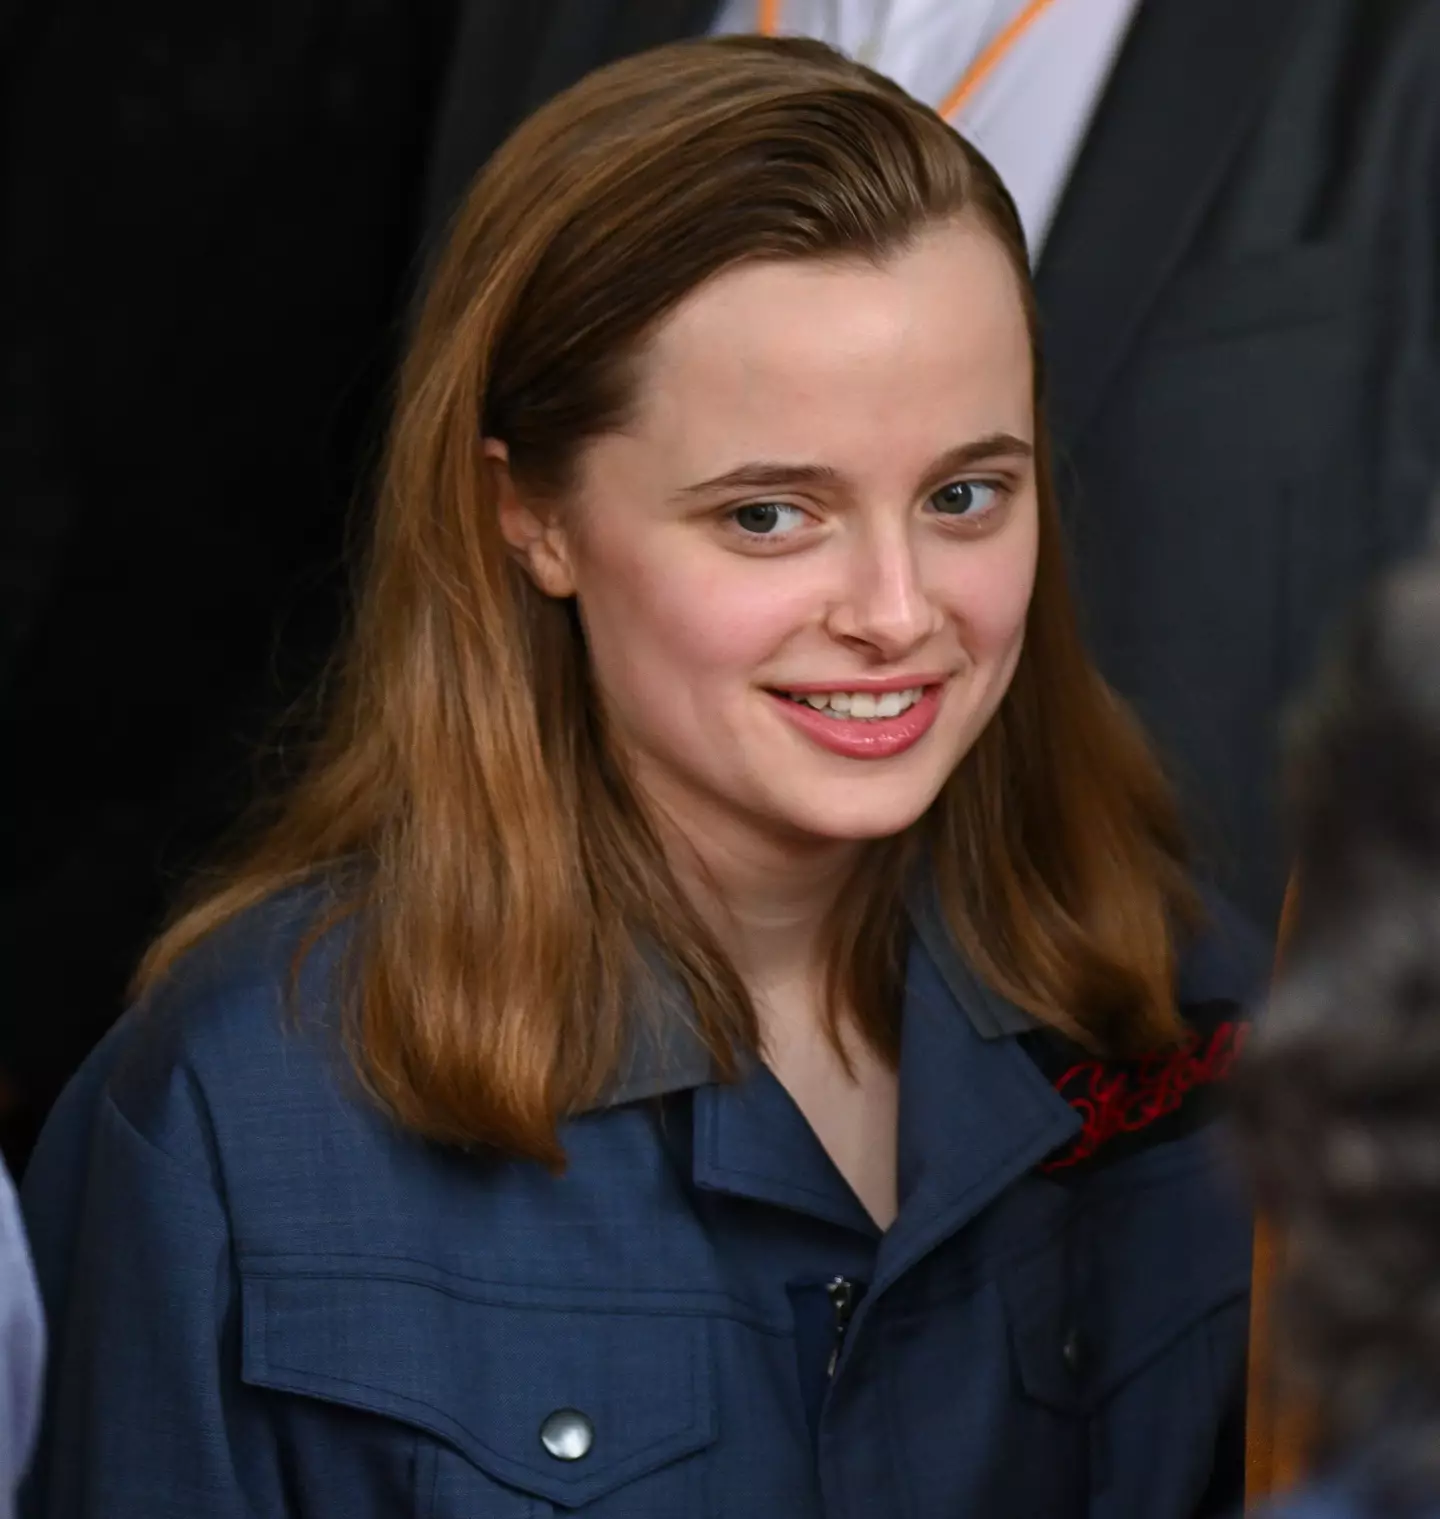 Vivienne Jolie-Pitt appears to have changed her surname. (James Devaney/GC Images)